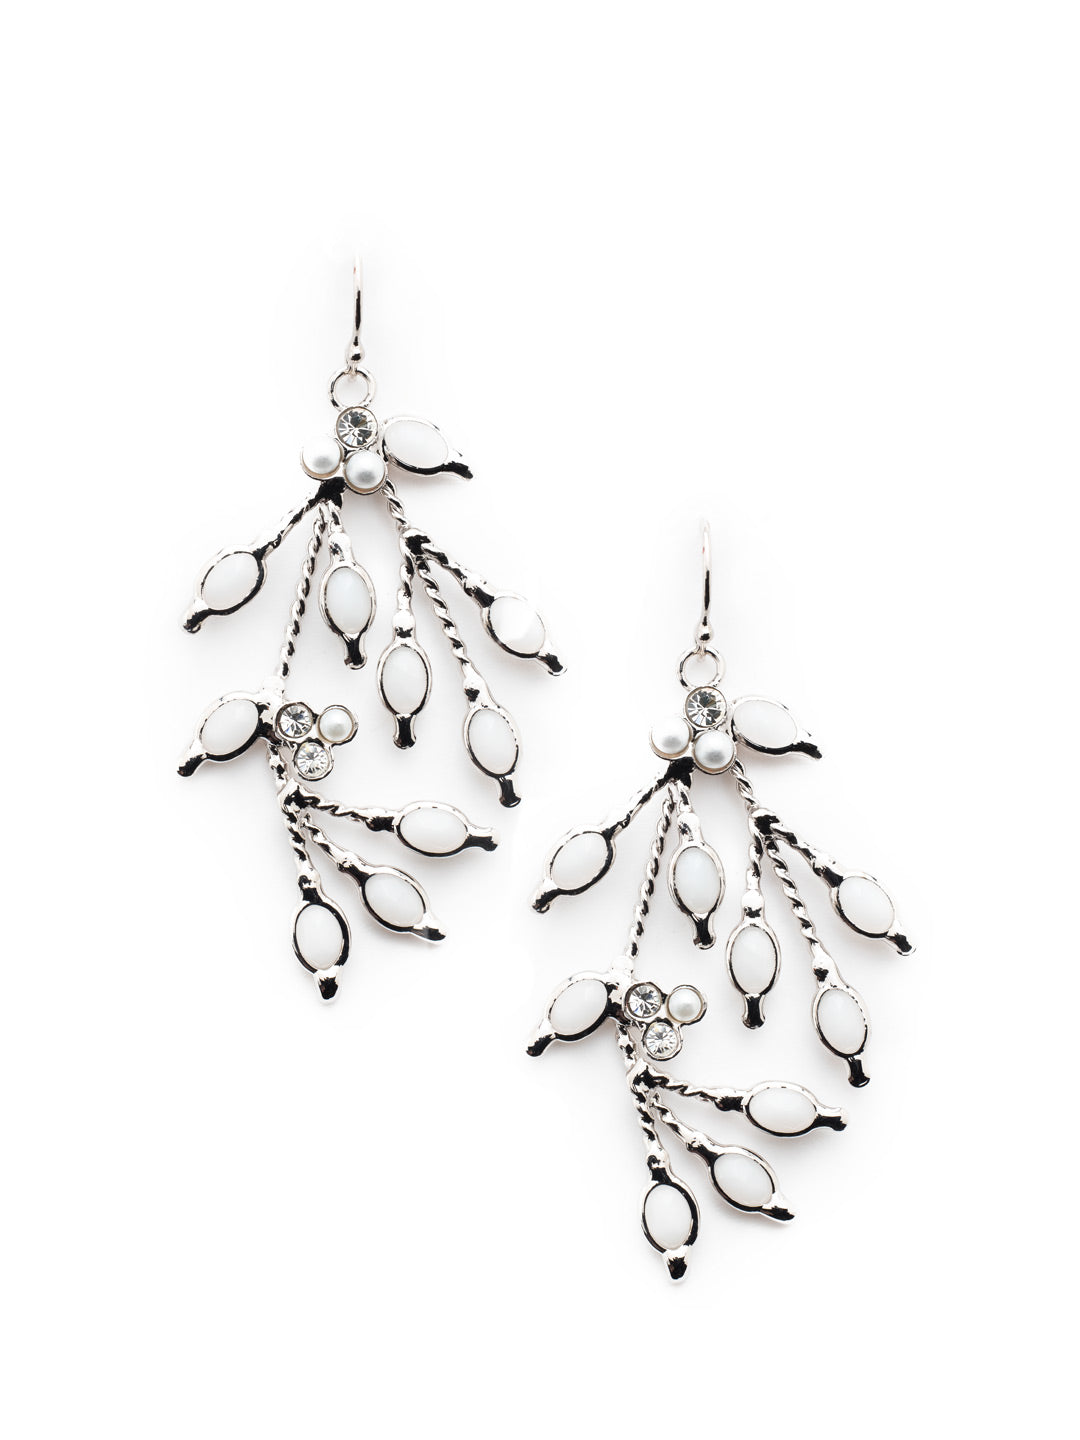 Salem Dangle Earrings - EET90RHMDP - The Salem Dangle Earring is an elegant earring that will make you shine at any event. Multipule stones hang from delicat chains to create a vine like look. From Sorrelli's Modern Pearl collection in our Palladium Silver-tone finish.